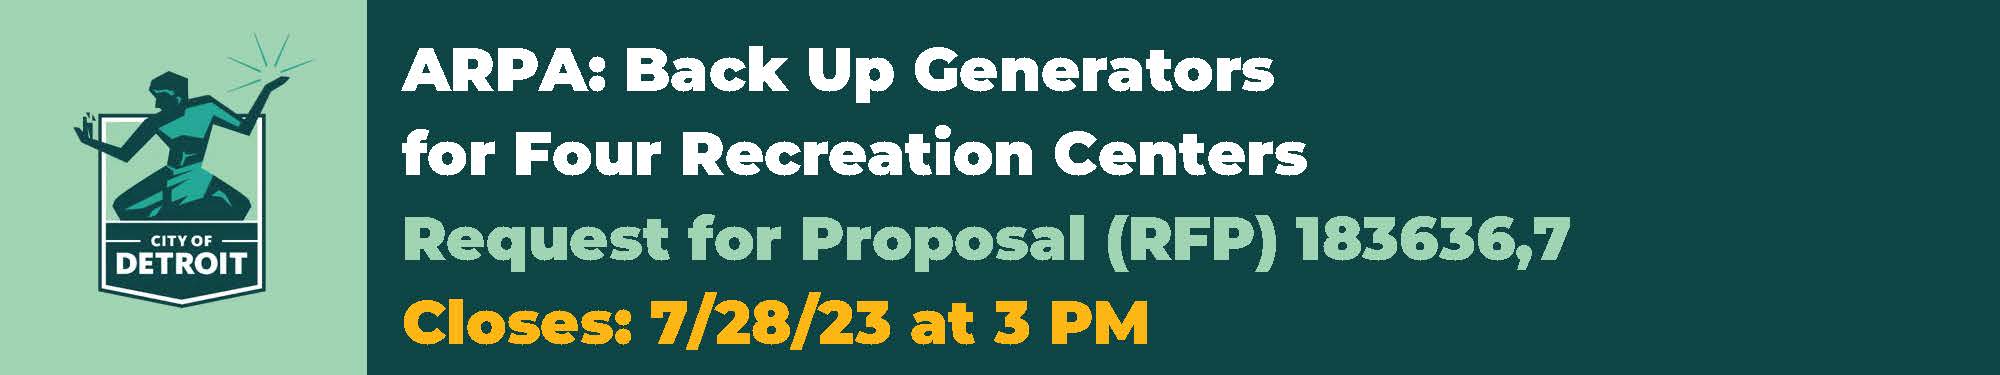 Take Part: ARPA: Back Up Generators for Four Recreation Centers